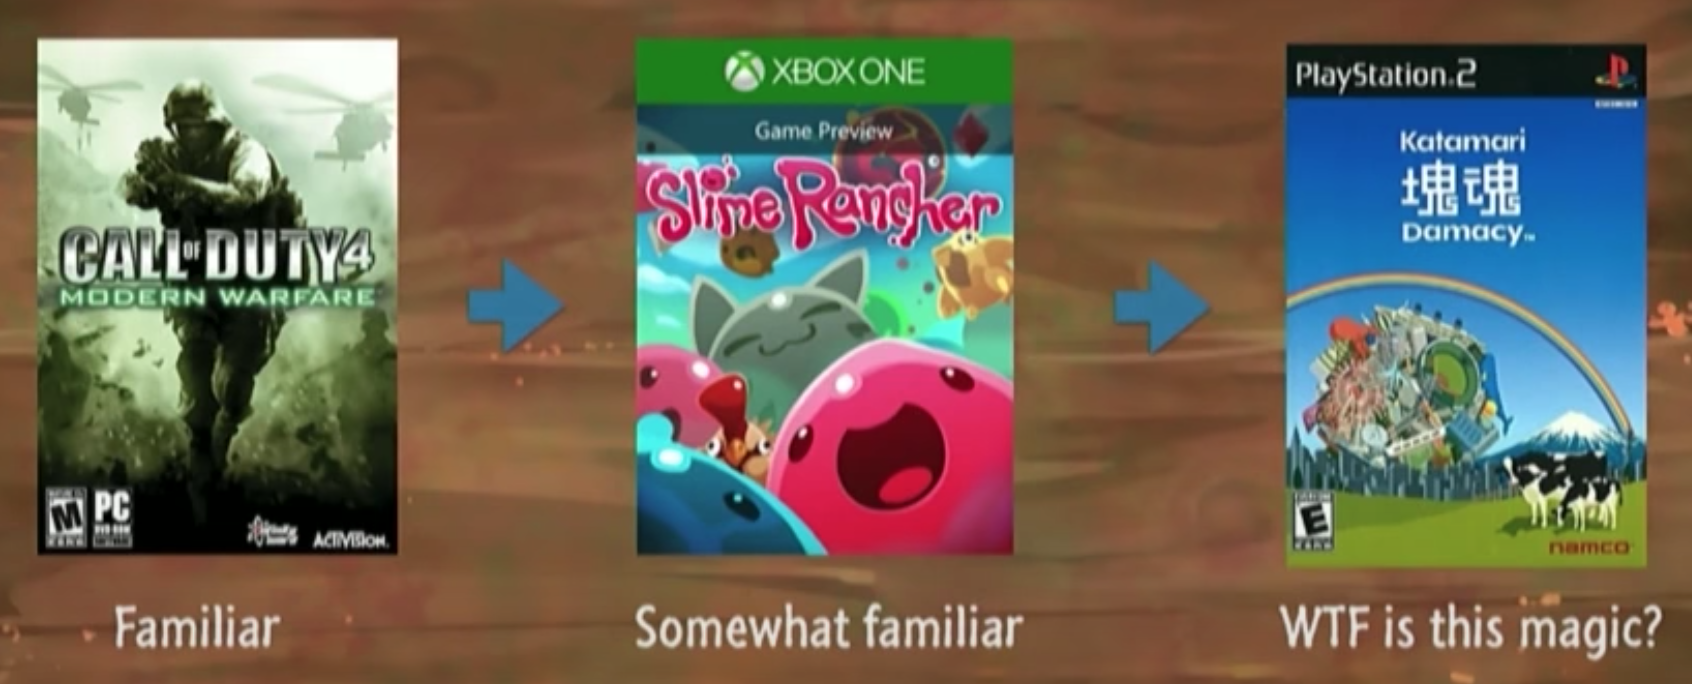 Slime Rancher: neither too familiar nor unfamiliar